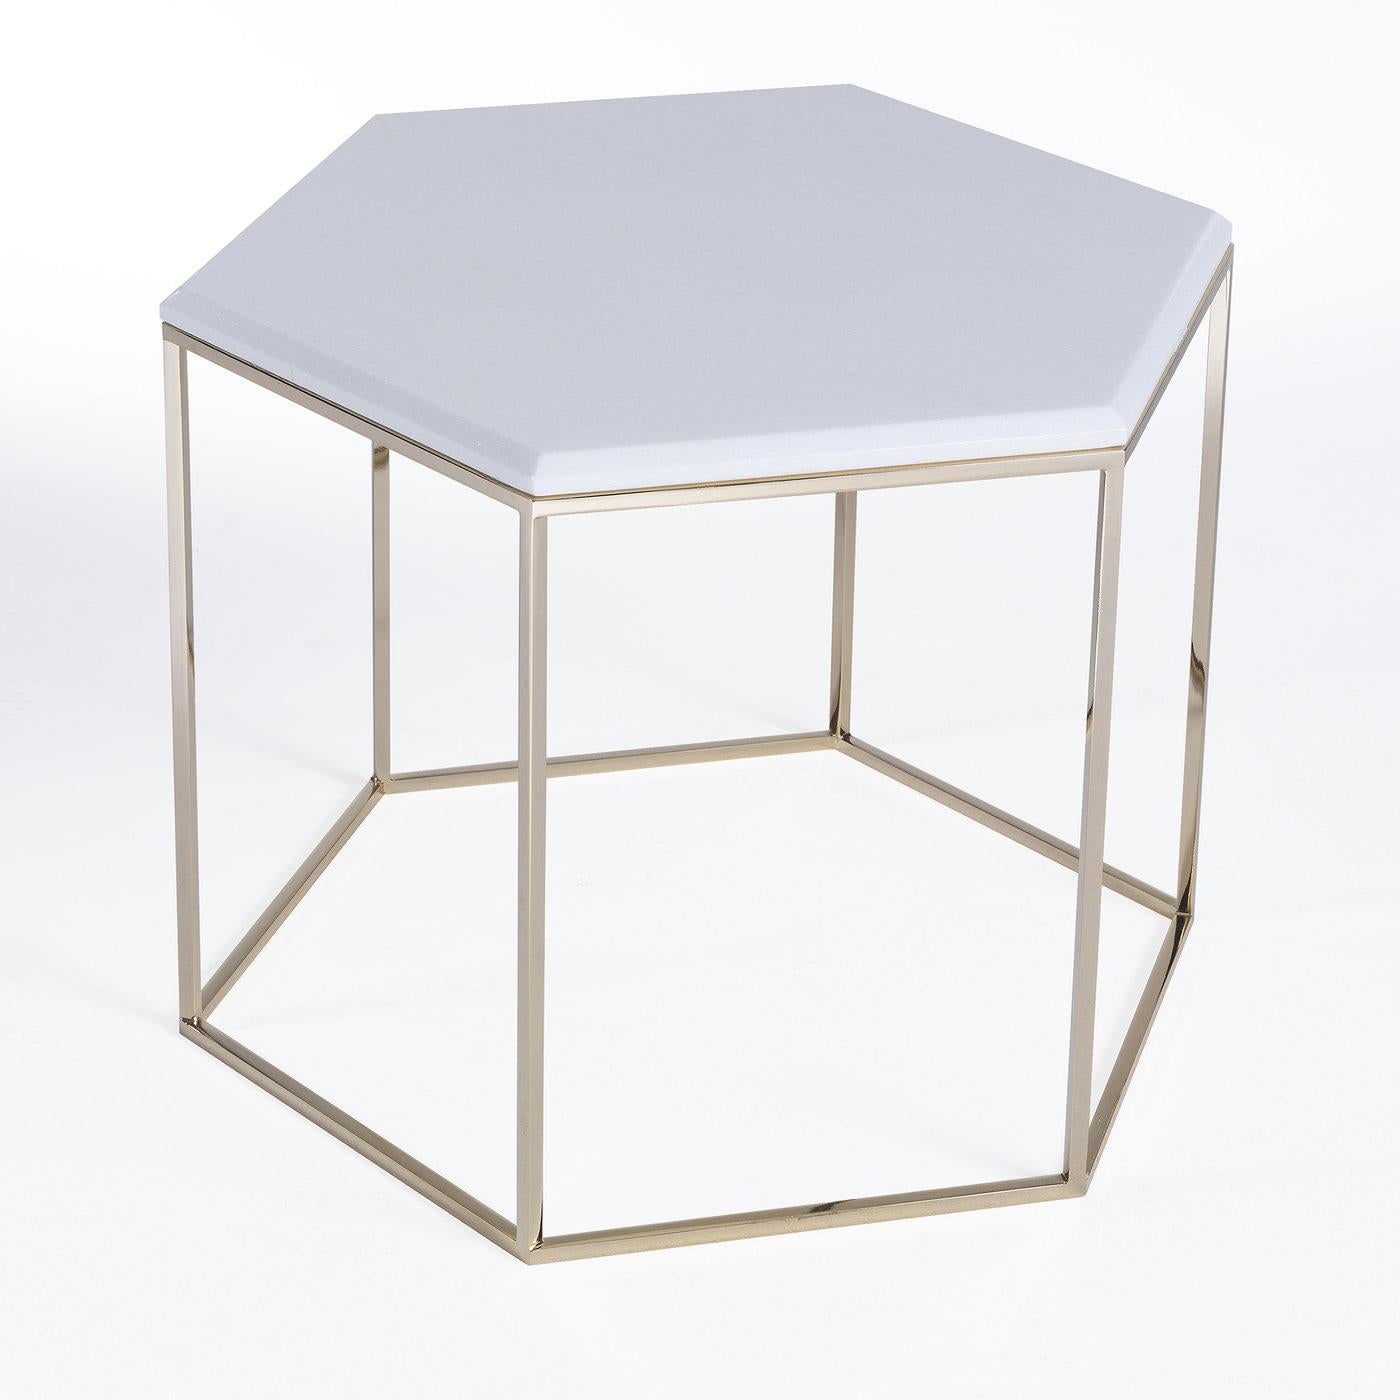 Fresh and versatile, the modern-aesthetic of this hexagonal side table befits a minimalist living room or patio decor. The hexagonal top made of white Sivec marble is supported by an open, hexagonal frame in brass, the combination of voids and